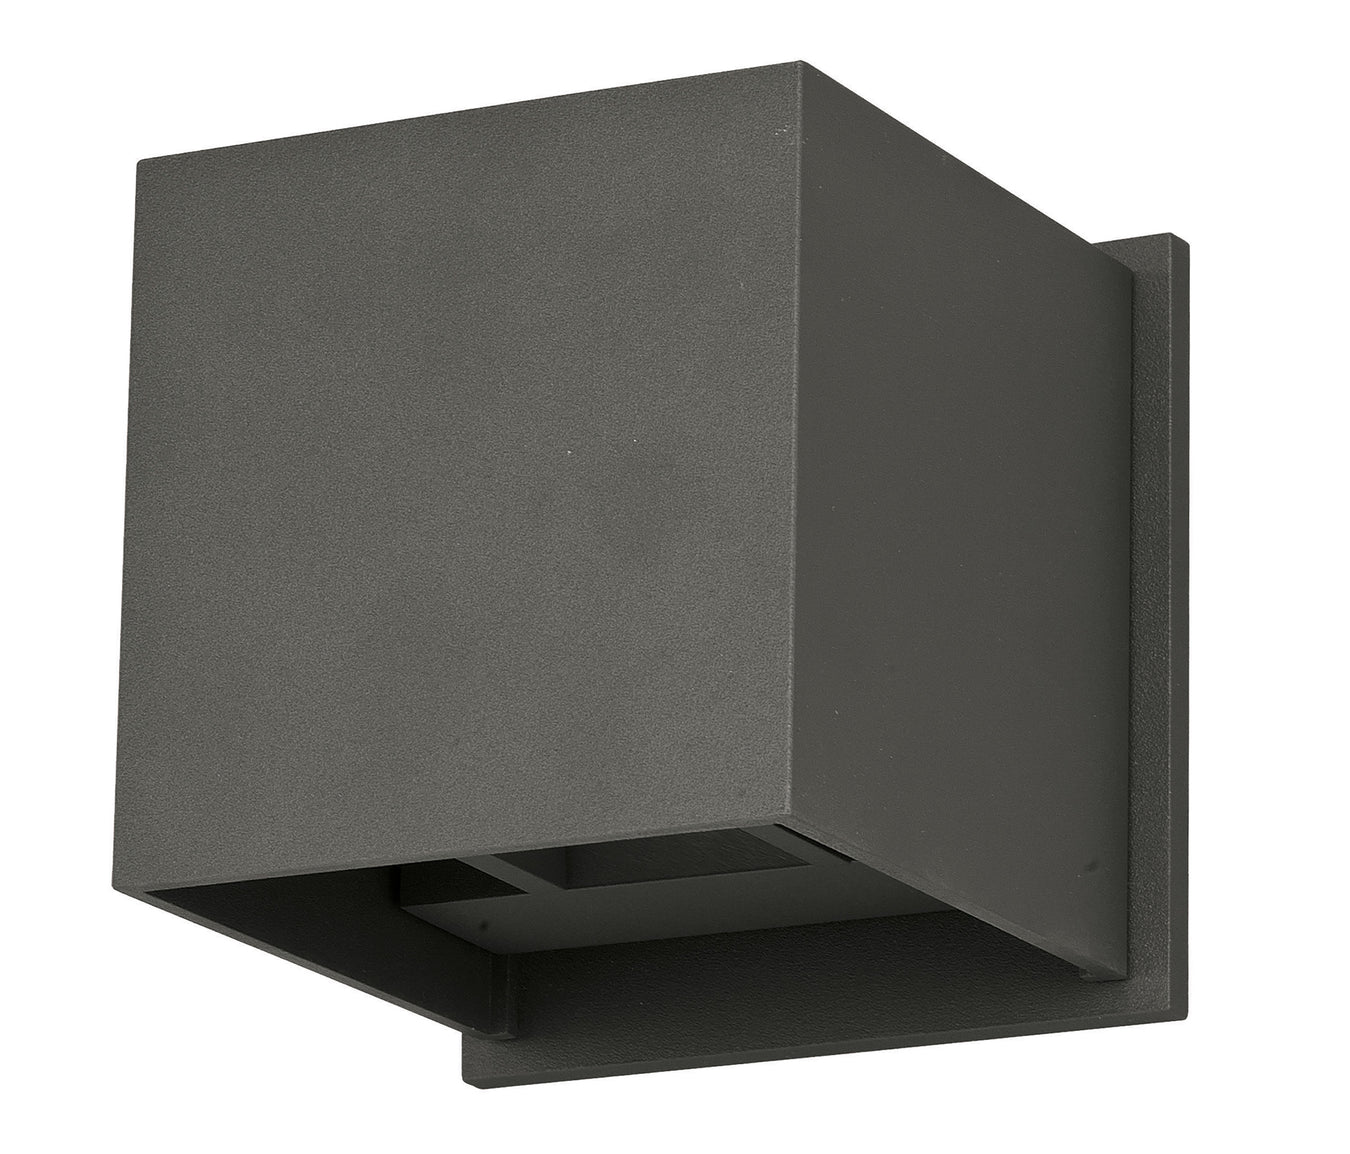 Alumilux: Cube LED Outdoor Wall Sconce in Bronze